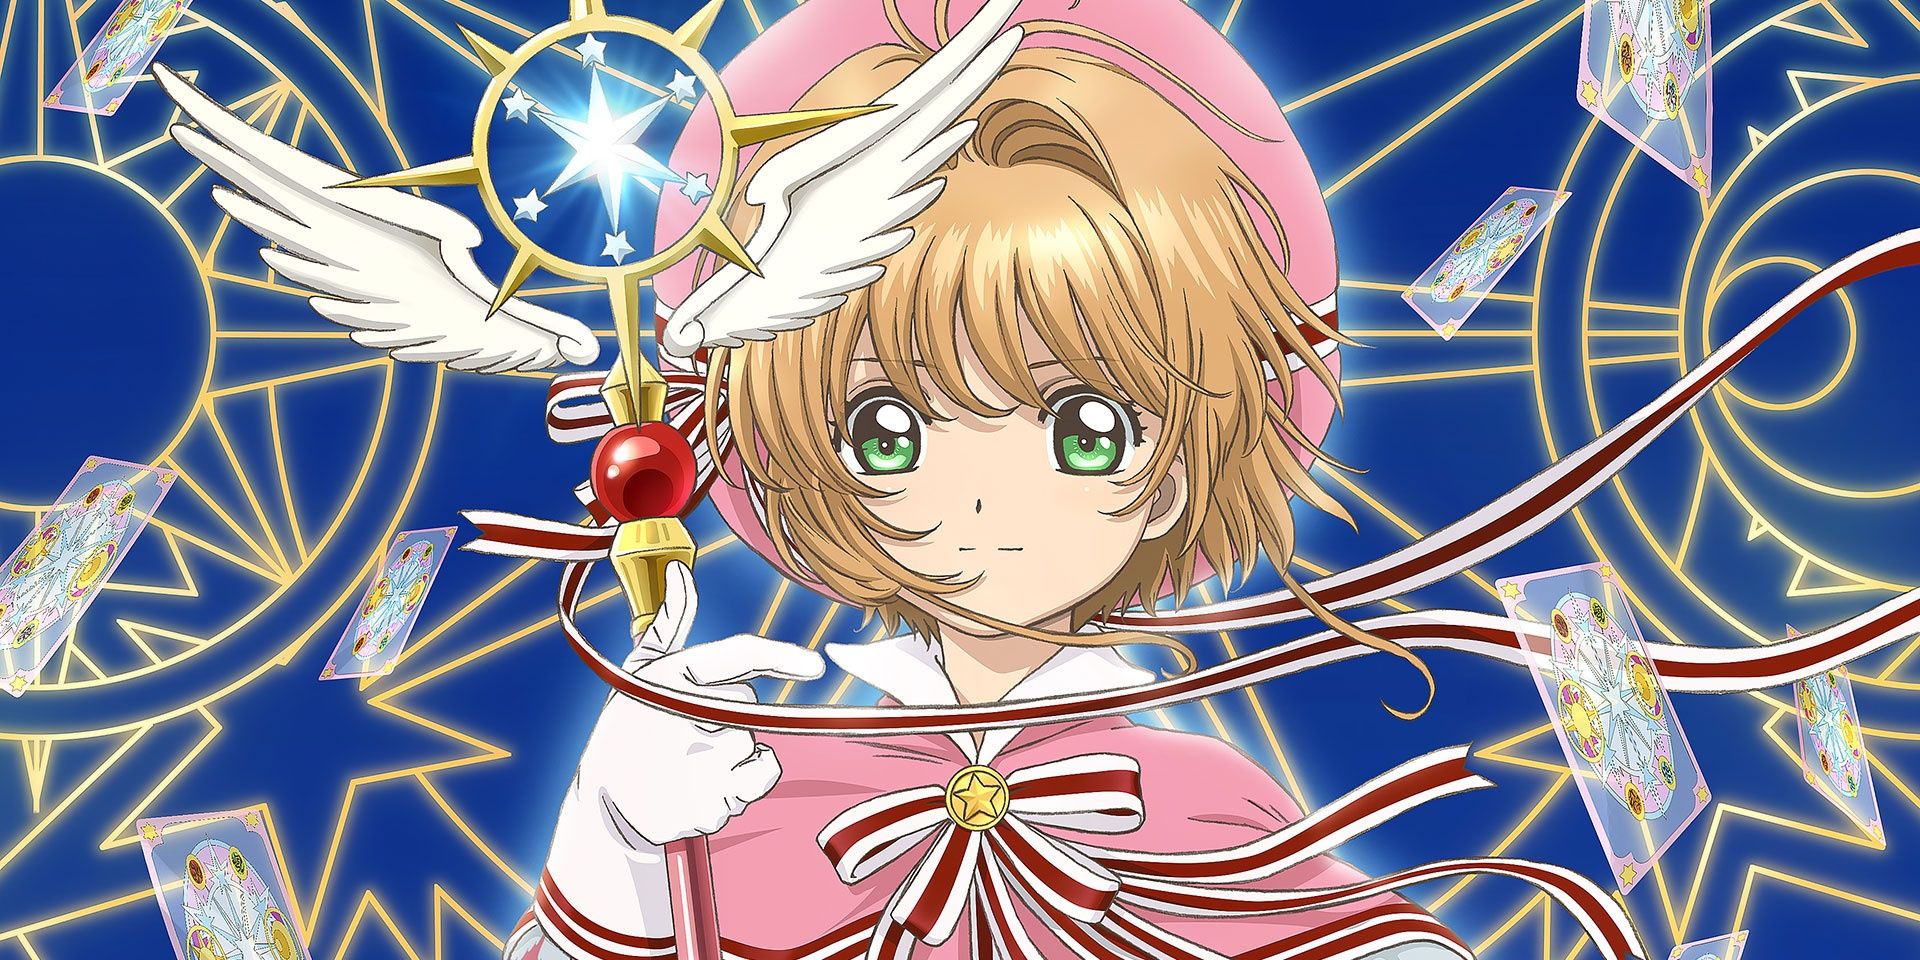 Sakura Kinomoto with her scepter and surrounded by Clow Cards from Cardcaptor Sakura